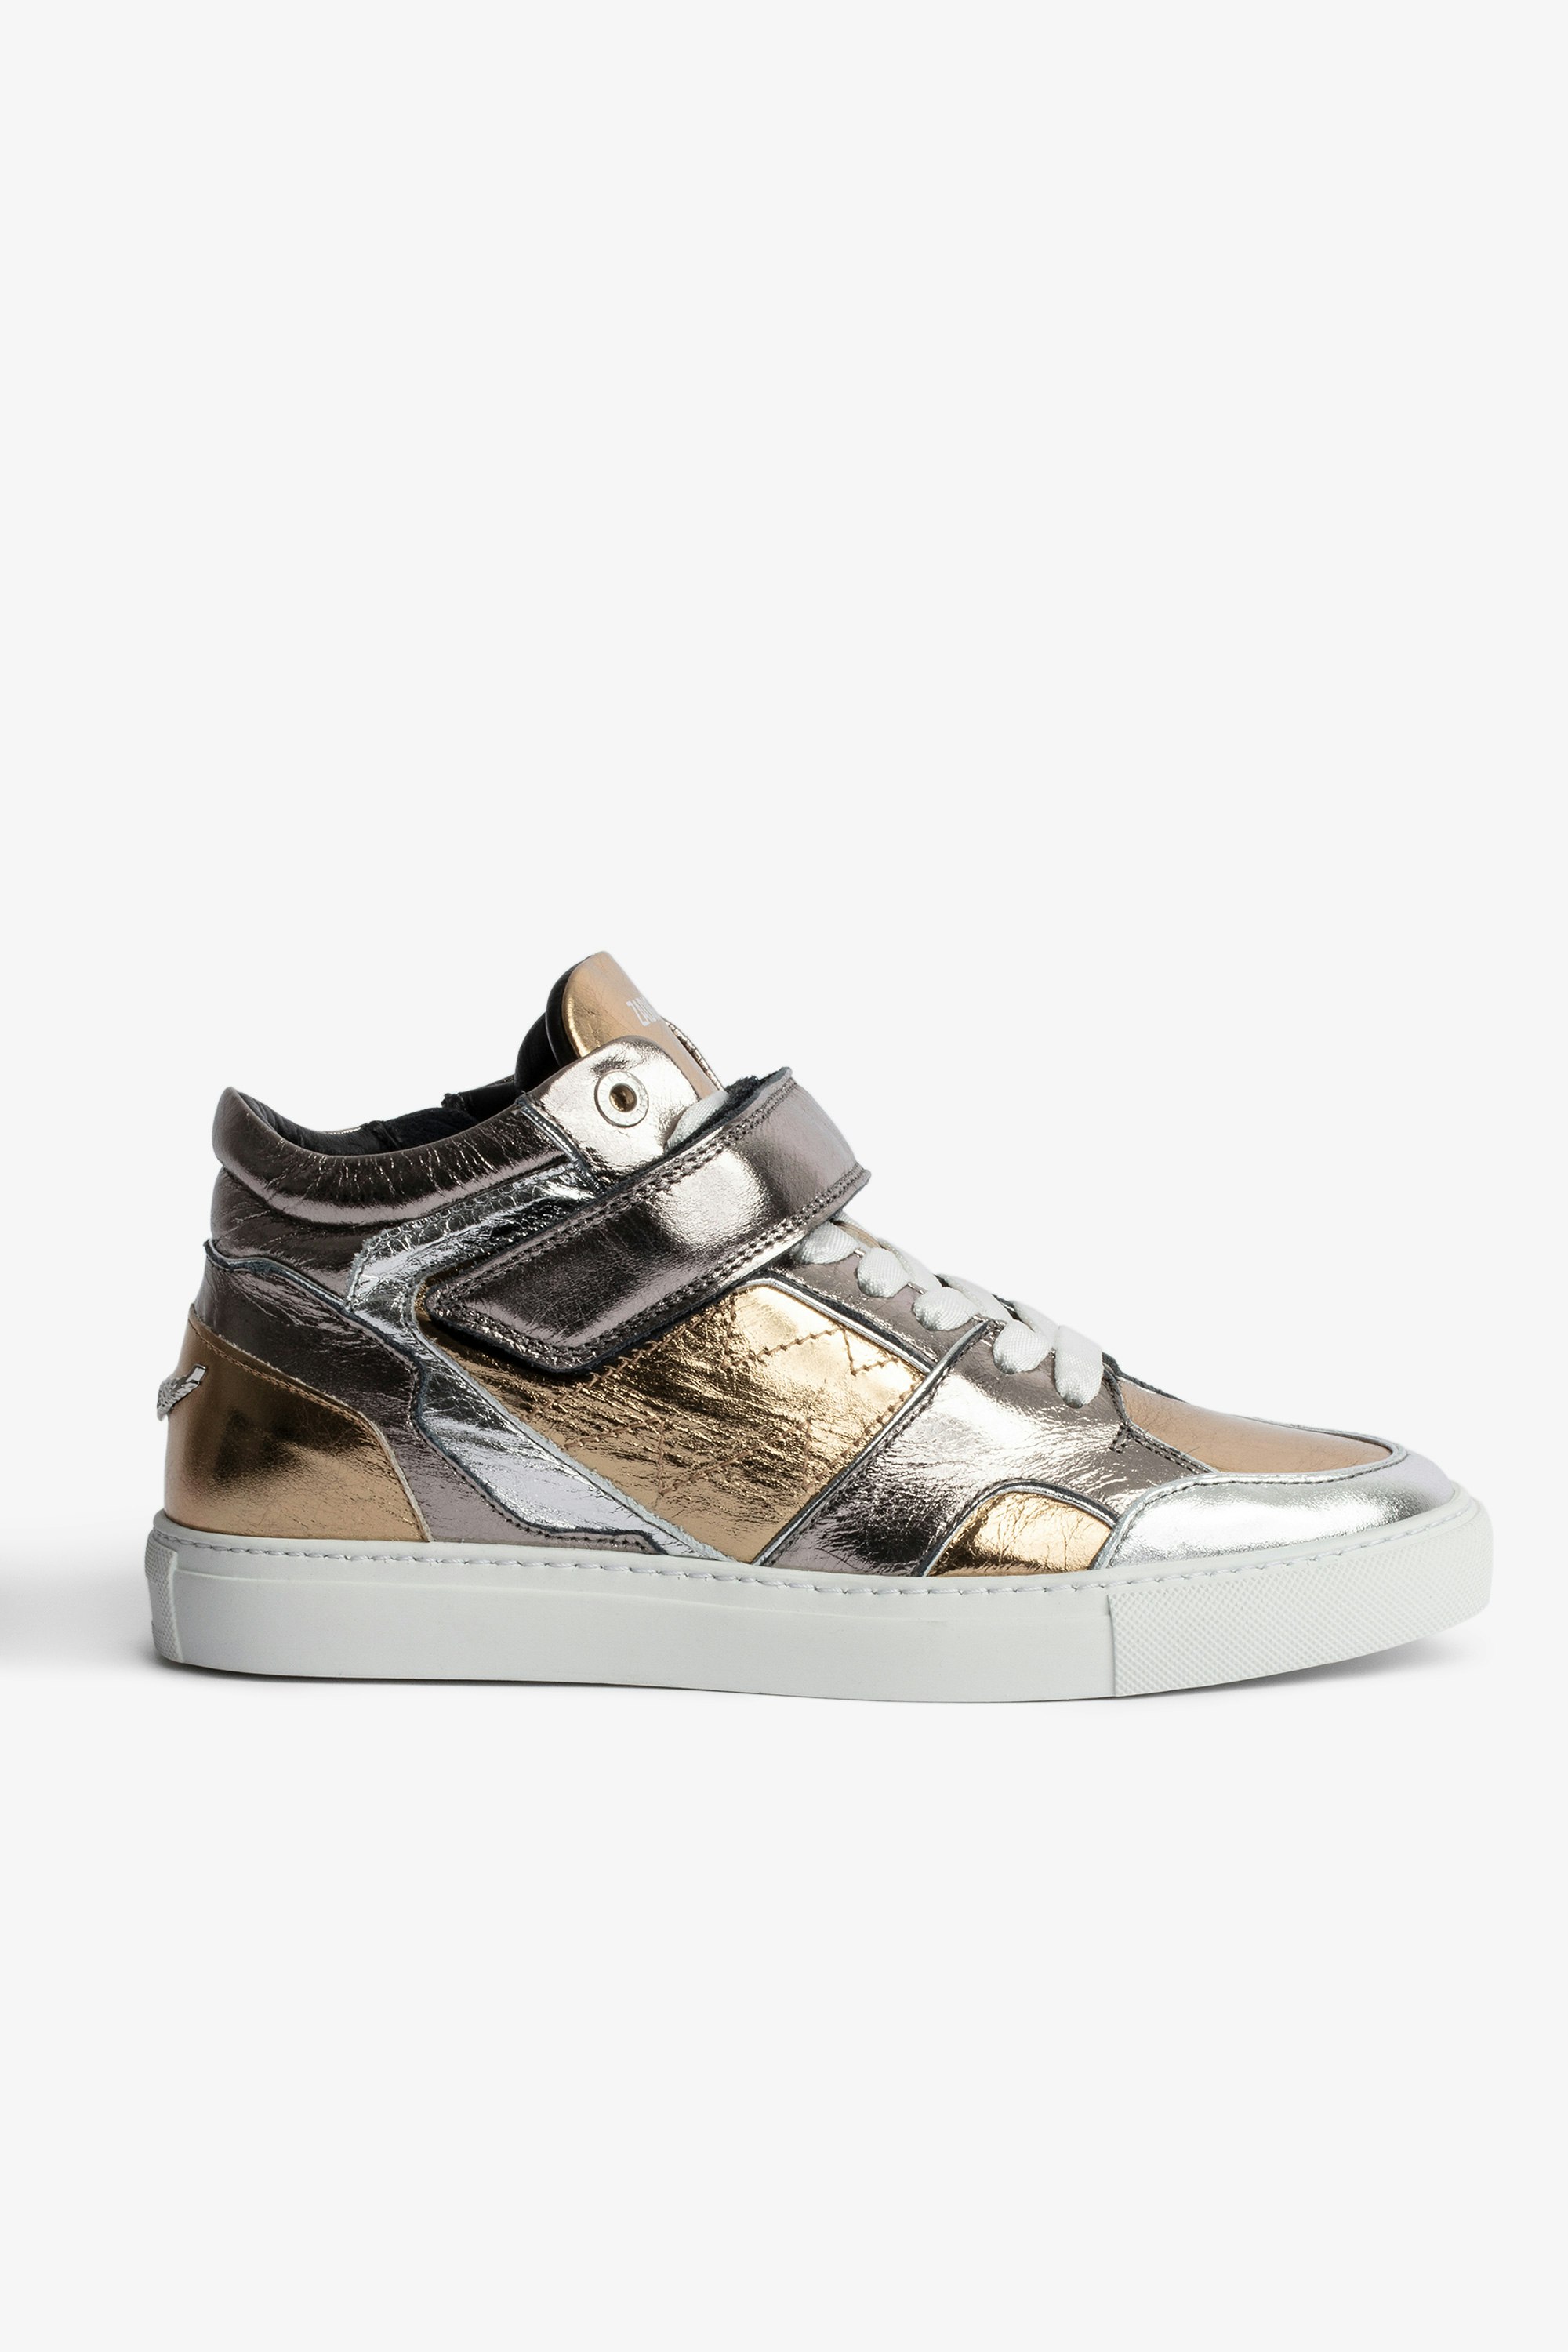 ZV1747 Mid Flash Vintage metal mix スニーカー Women’s mid-top sneakers in silver and gold metallic leather